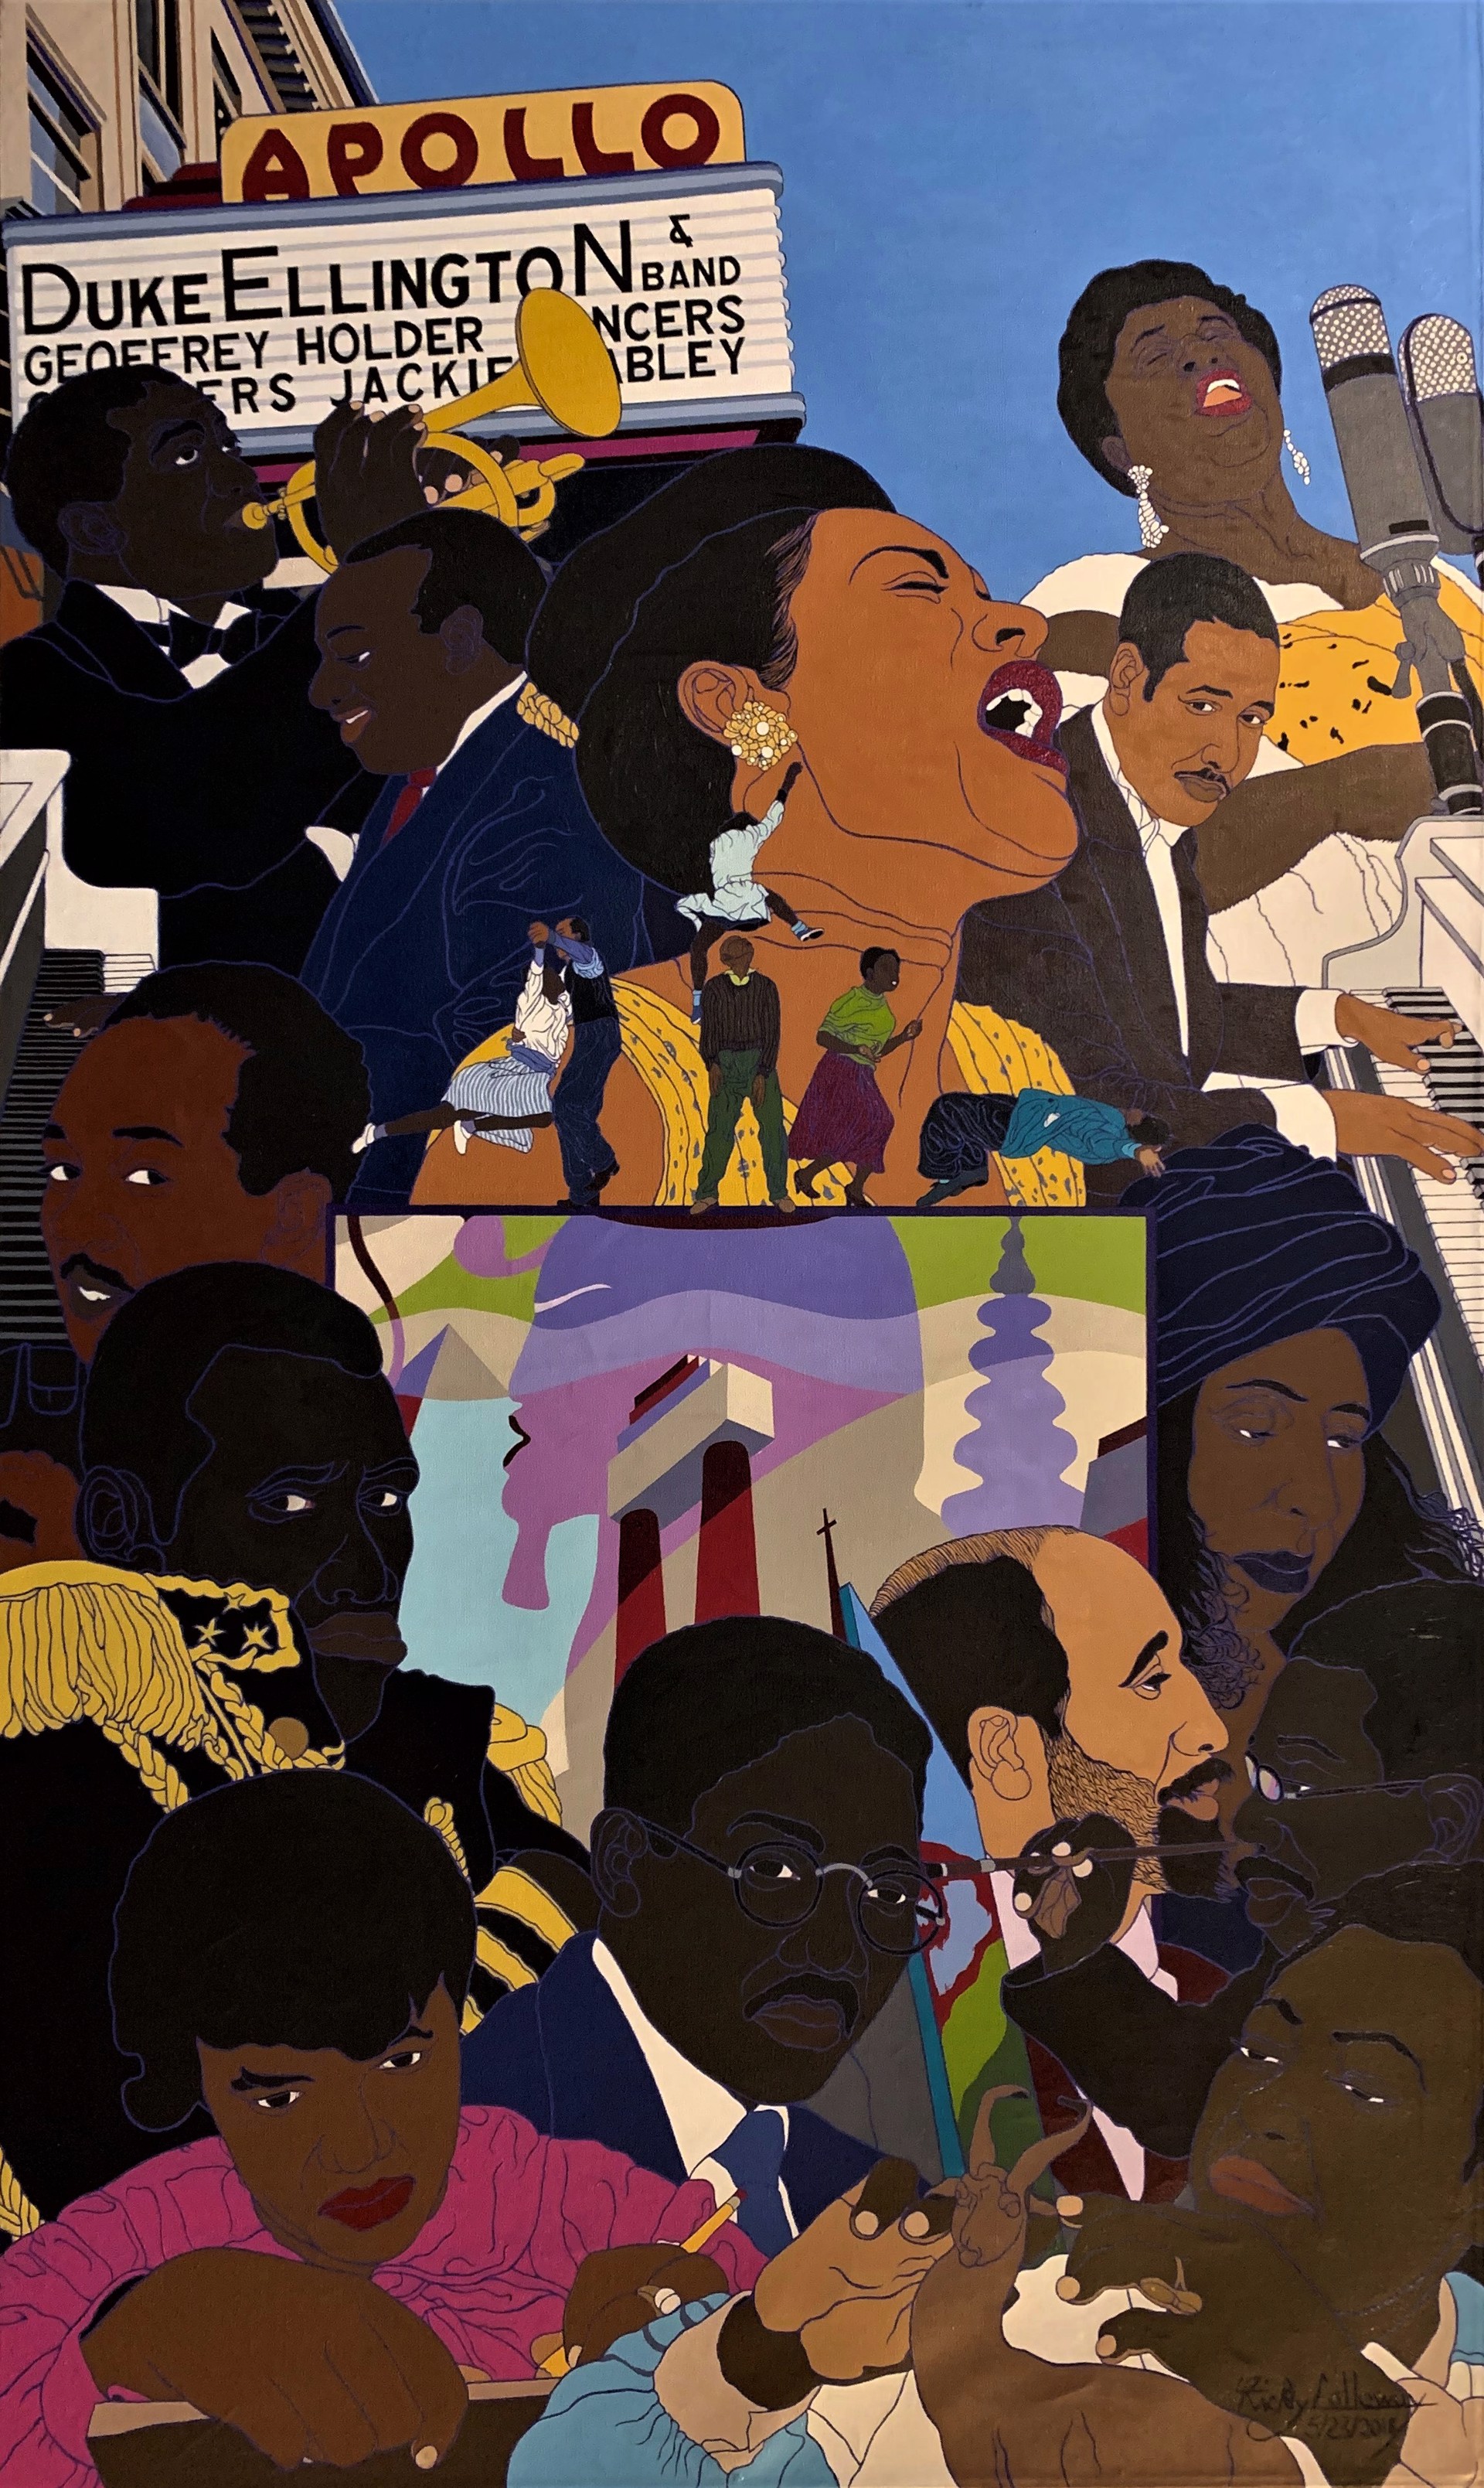 "Pioneers of the Harlem Renaissance" by Ricky Calloway